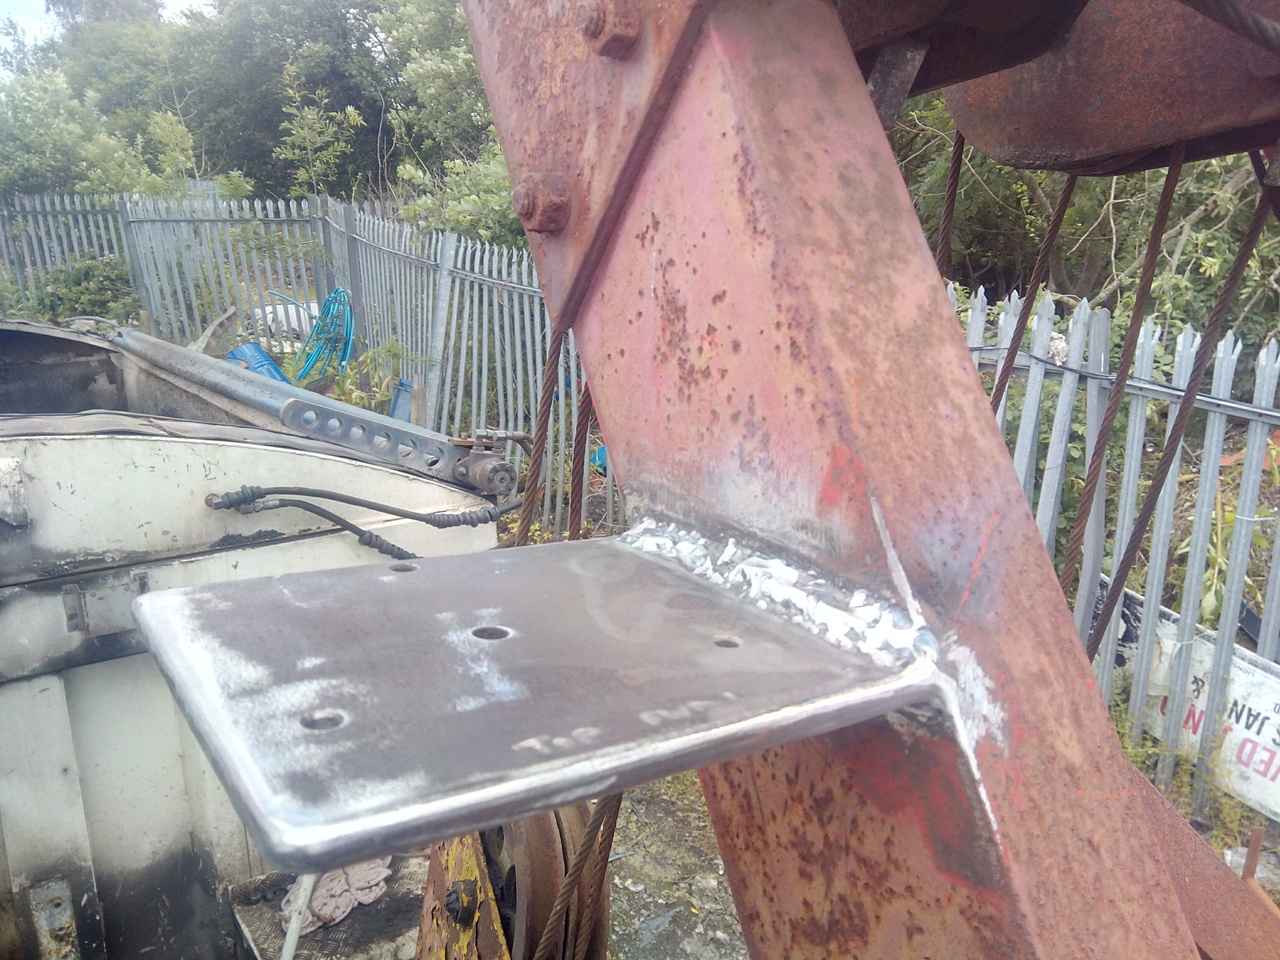 Close-up with a very thick and sturdy looking steel plate welded
to the side of the boom. The plate has 4 holes drilled into it, 3 in a
triangle, with the 4th in the centre.